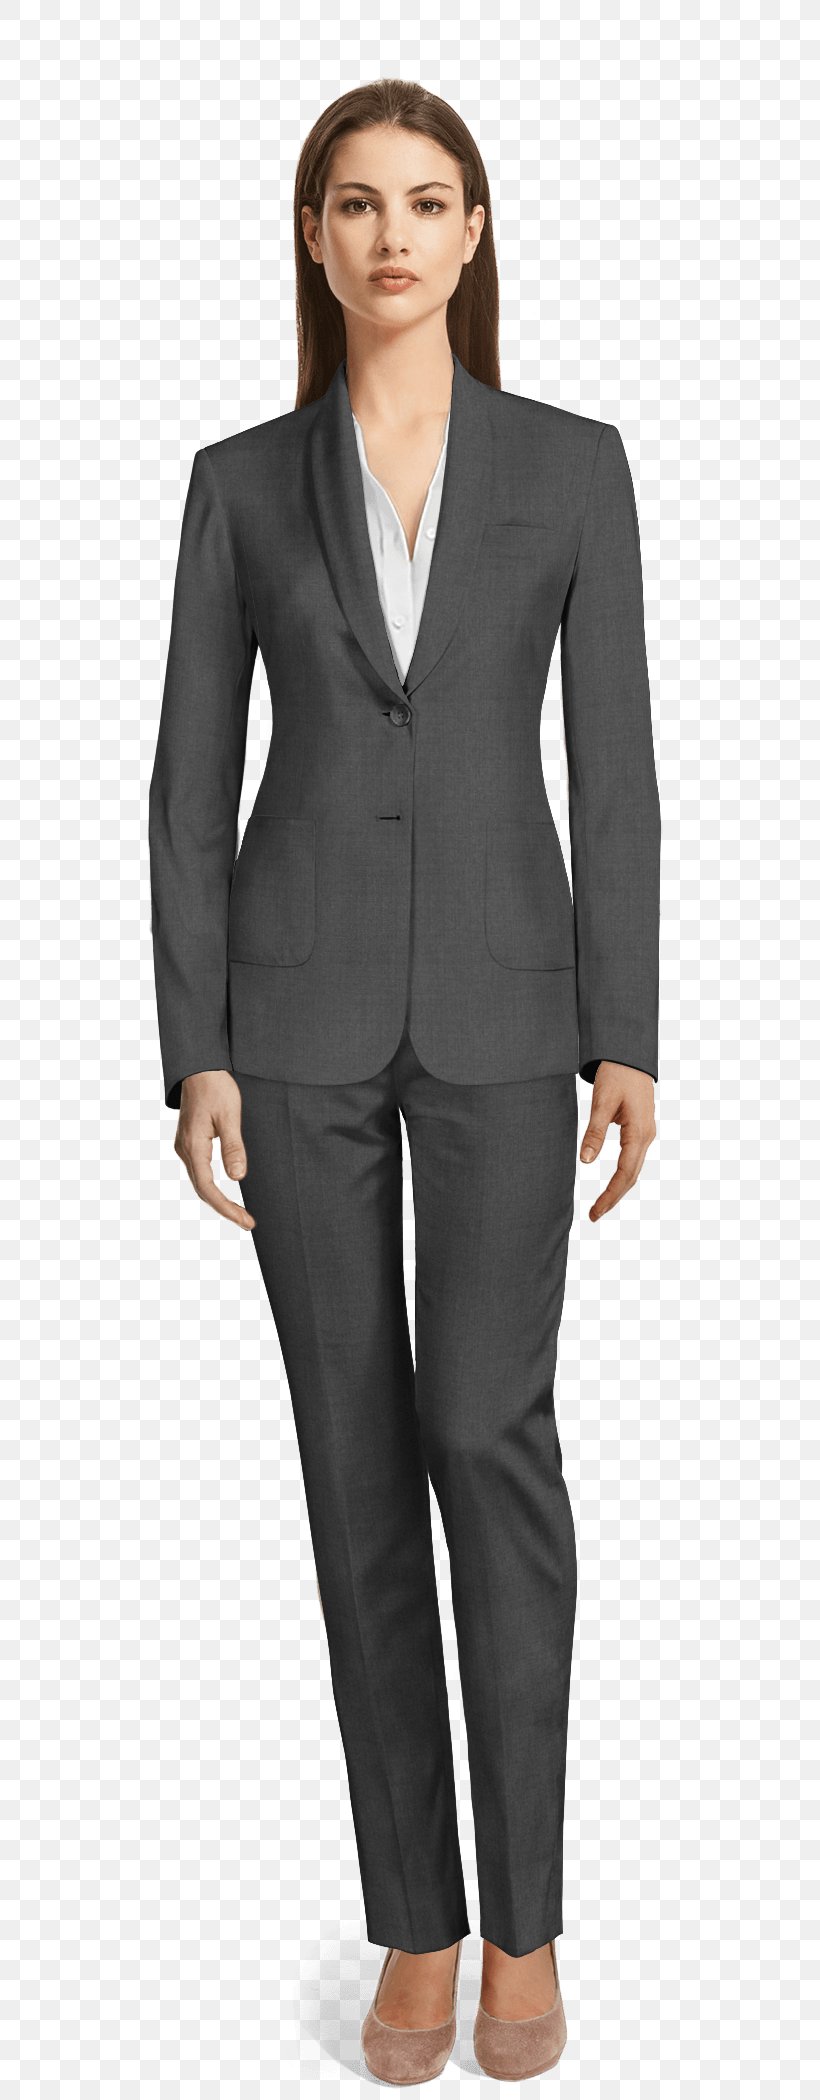 Pant Suits Double-breasted Clothing Jakkupuku, PNG, 655x2100px, Suit, Blazer, Business, Businessperson, Clothing Download Free